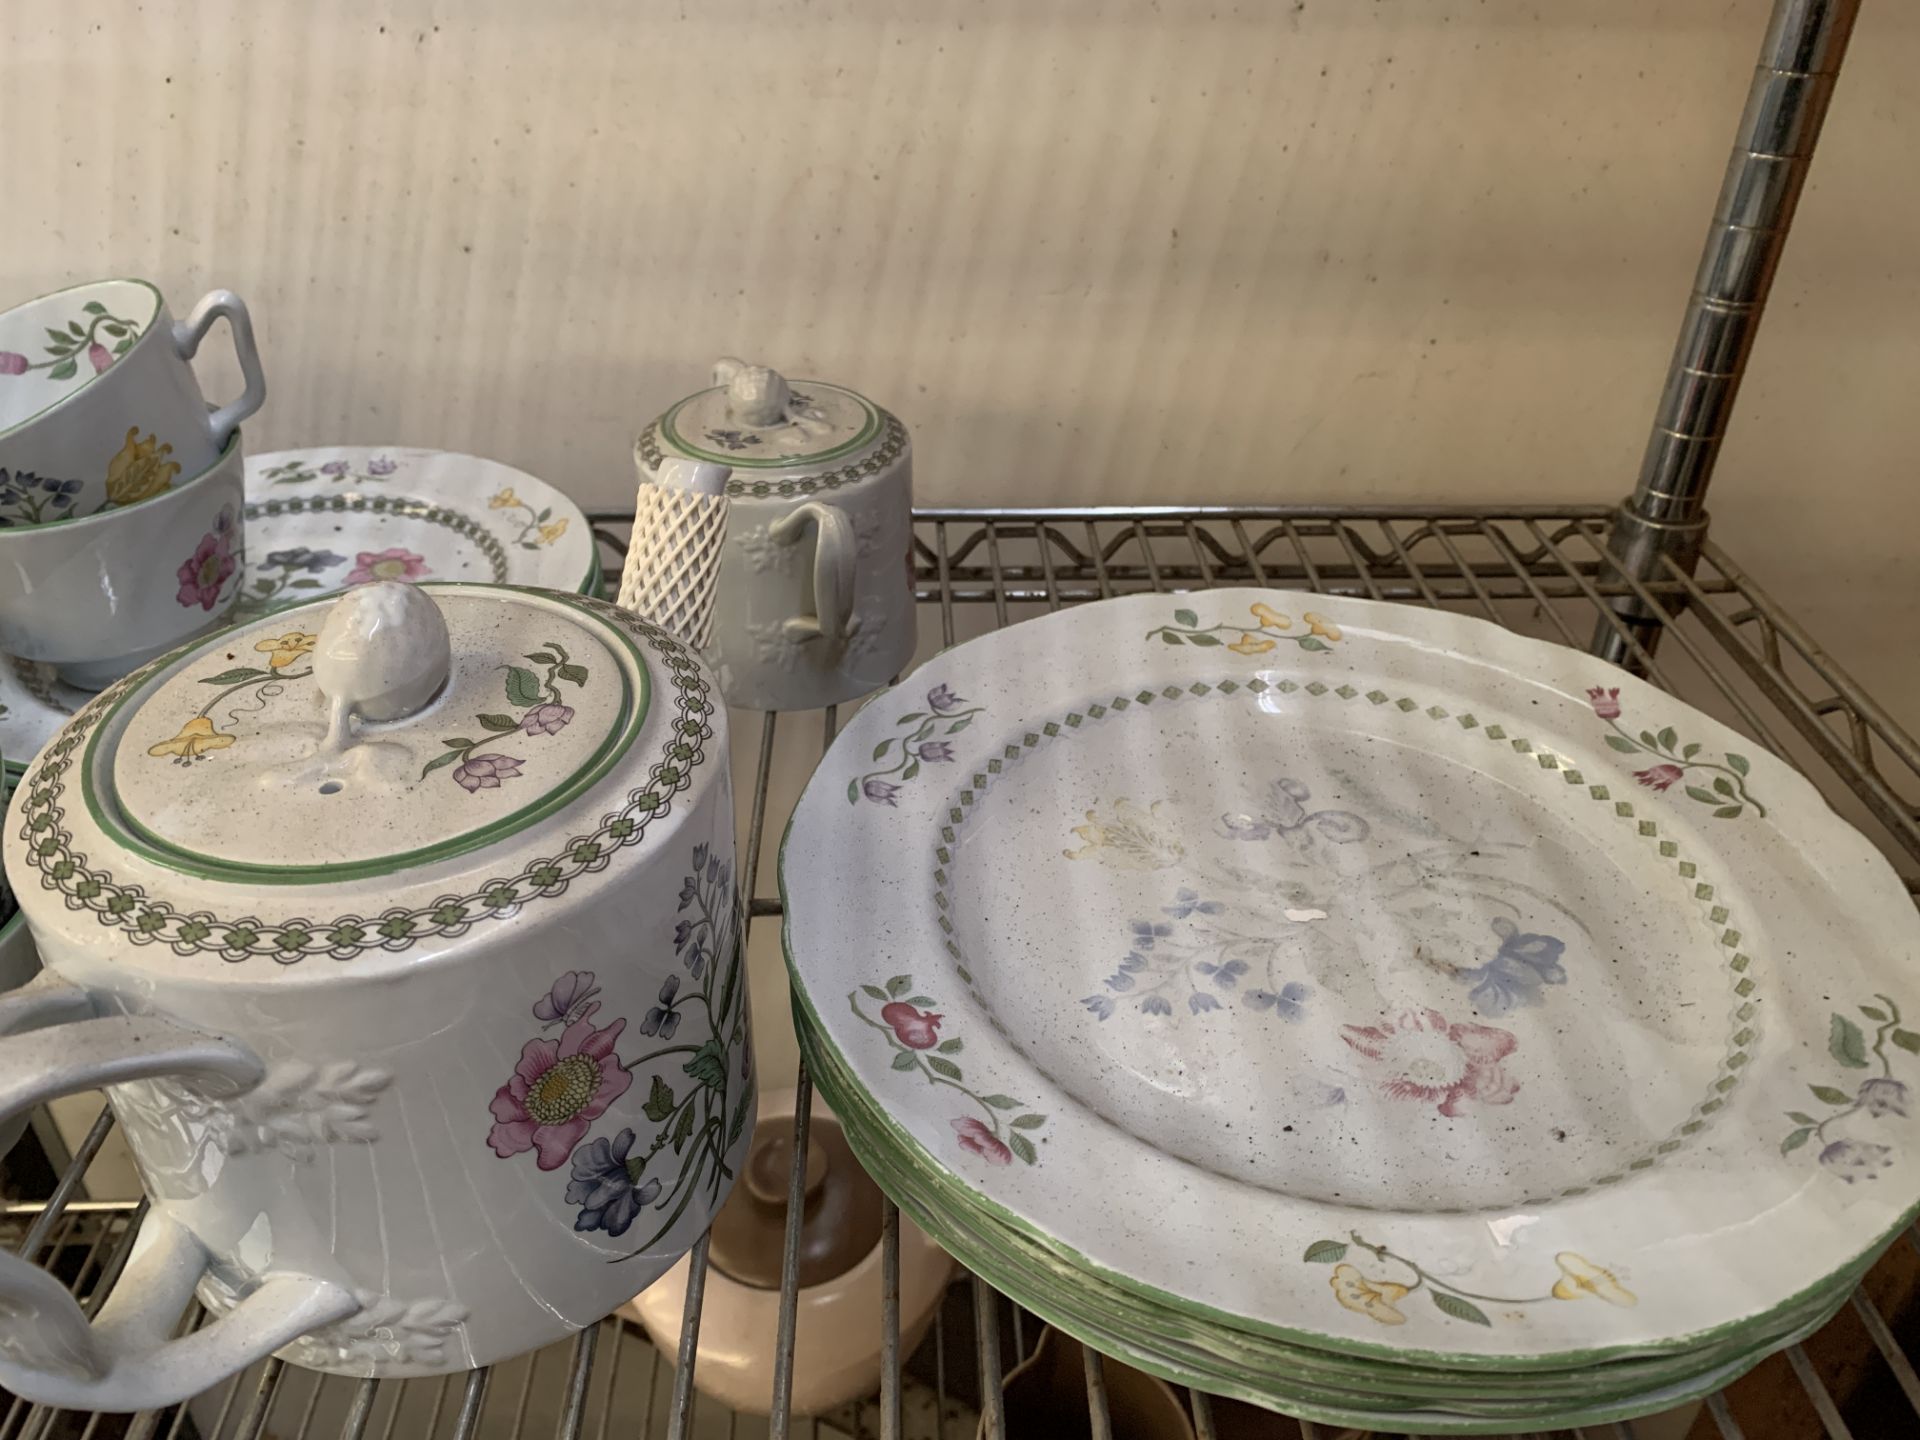 A quantity of Spode 'Summer Palace' tableware